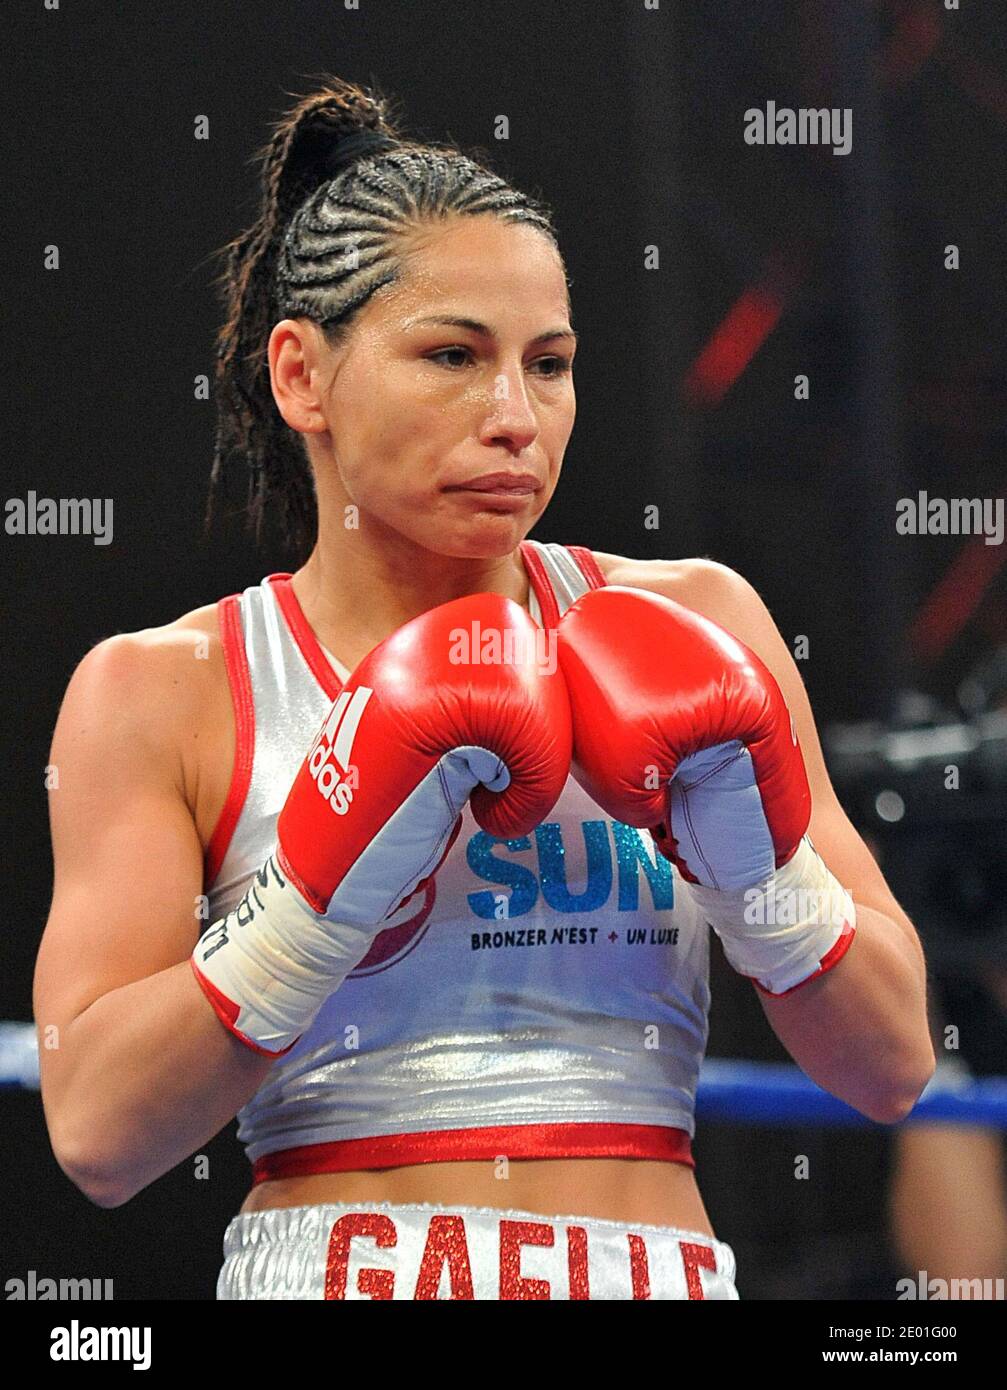 France's Gaelle Amand becomes World Champion WBF featherweight in Cergy  Pontoise suburb of Paris, France on November 30, 2013. Gaelle Amand defeats  Irma Balijagic Adler. Photo by Thierry Plessis/ABACAPRESS.COM Stock Photo -